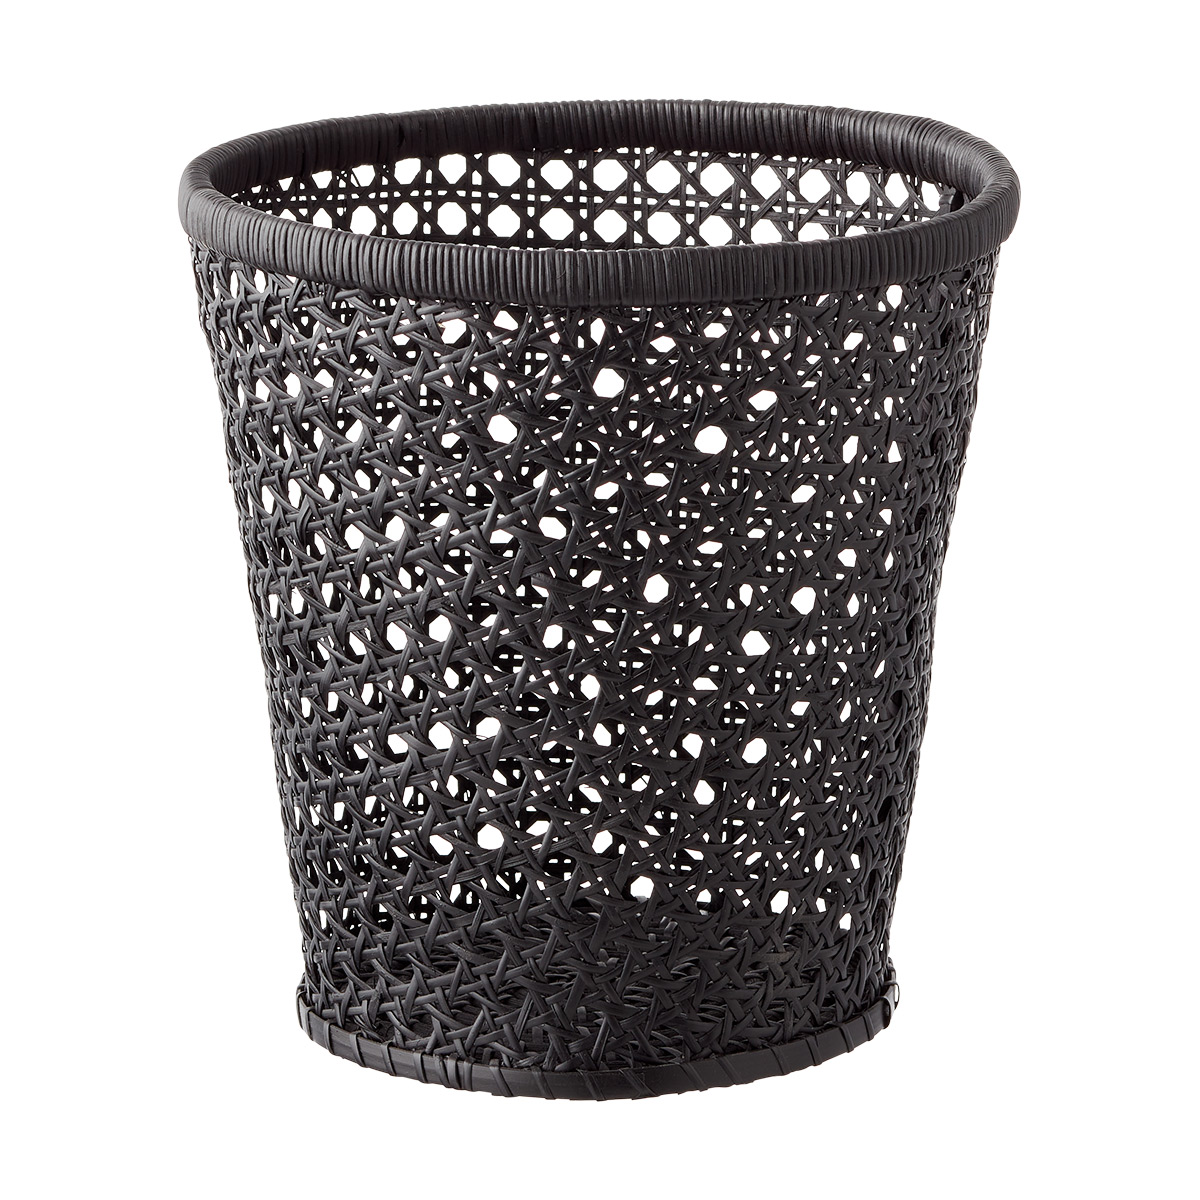 Albany Rattan Trash Can | The Container Store